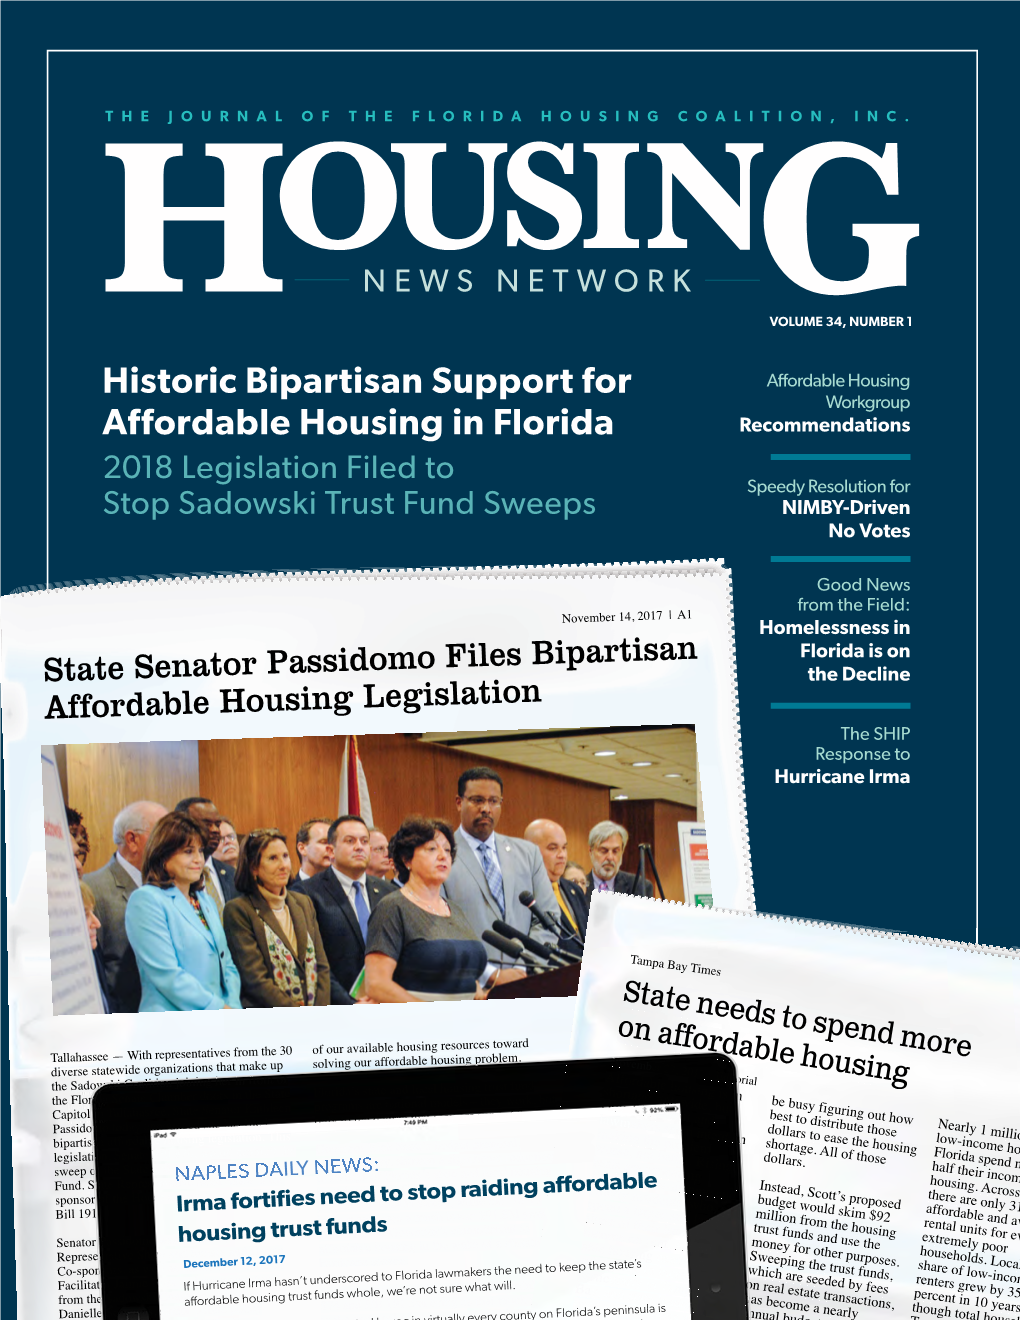 Historic Bipartisan Support for Affordable Housing in Florida